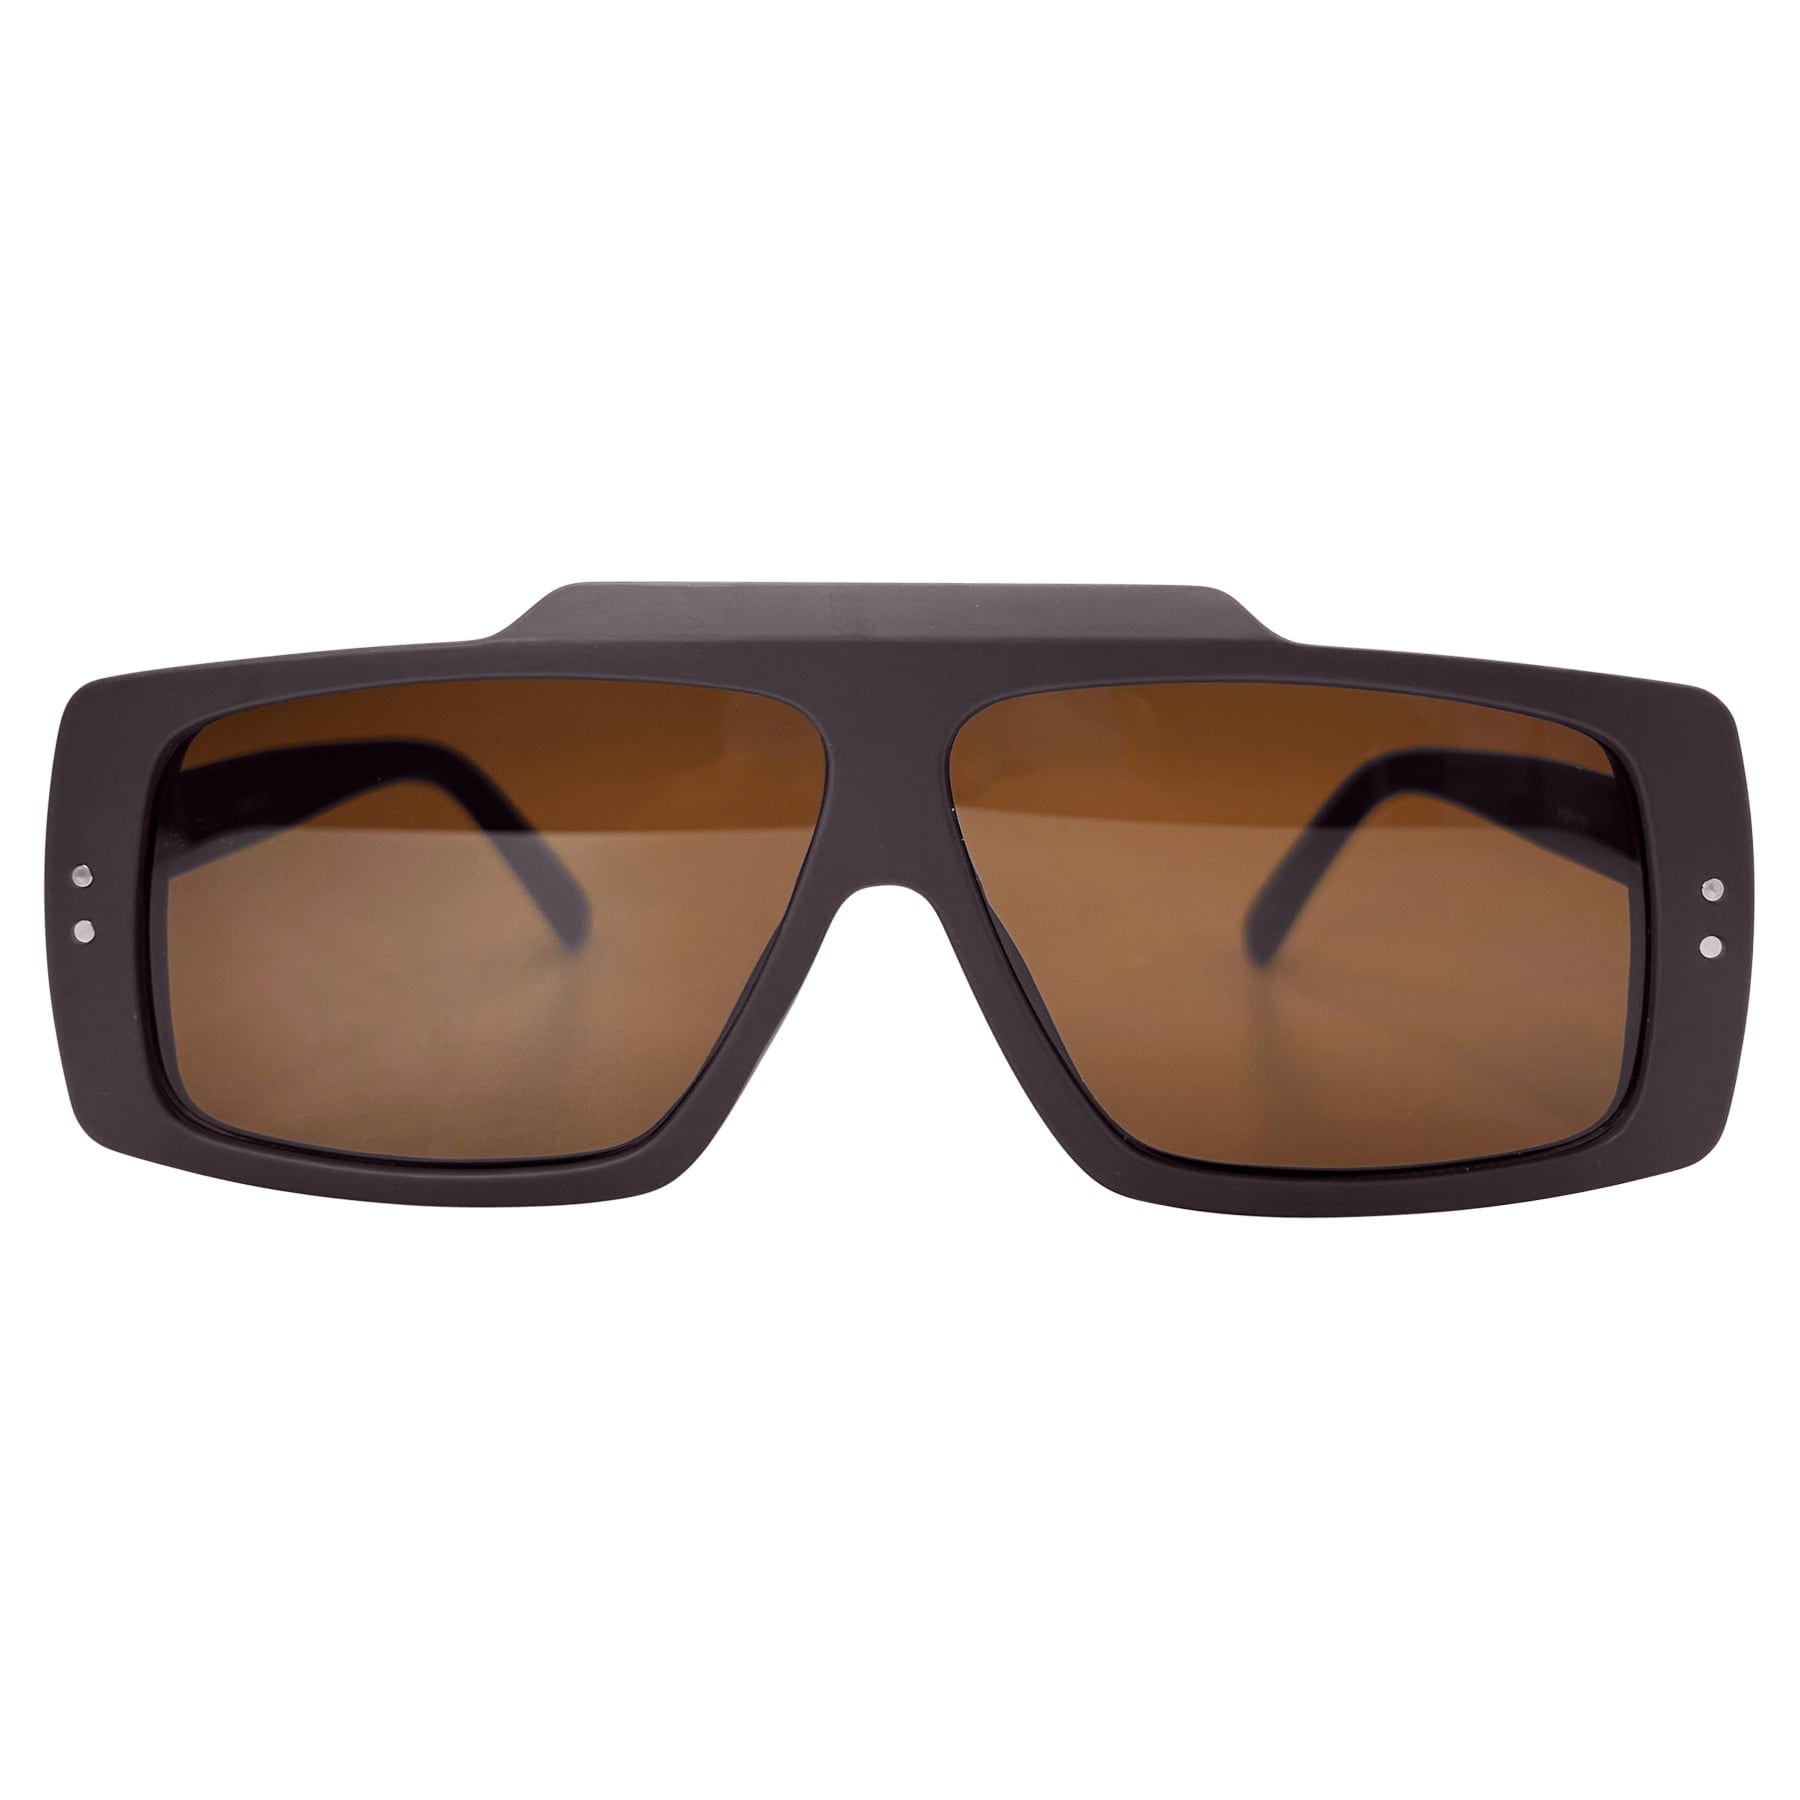 vintage sunglasses with a matte chocolate finish frame and brown lens